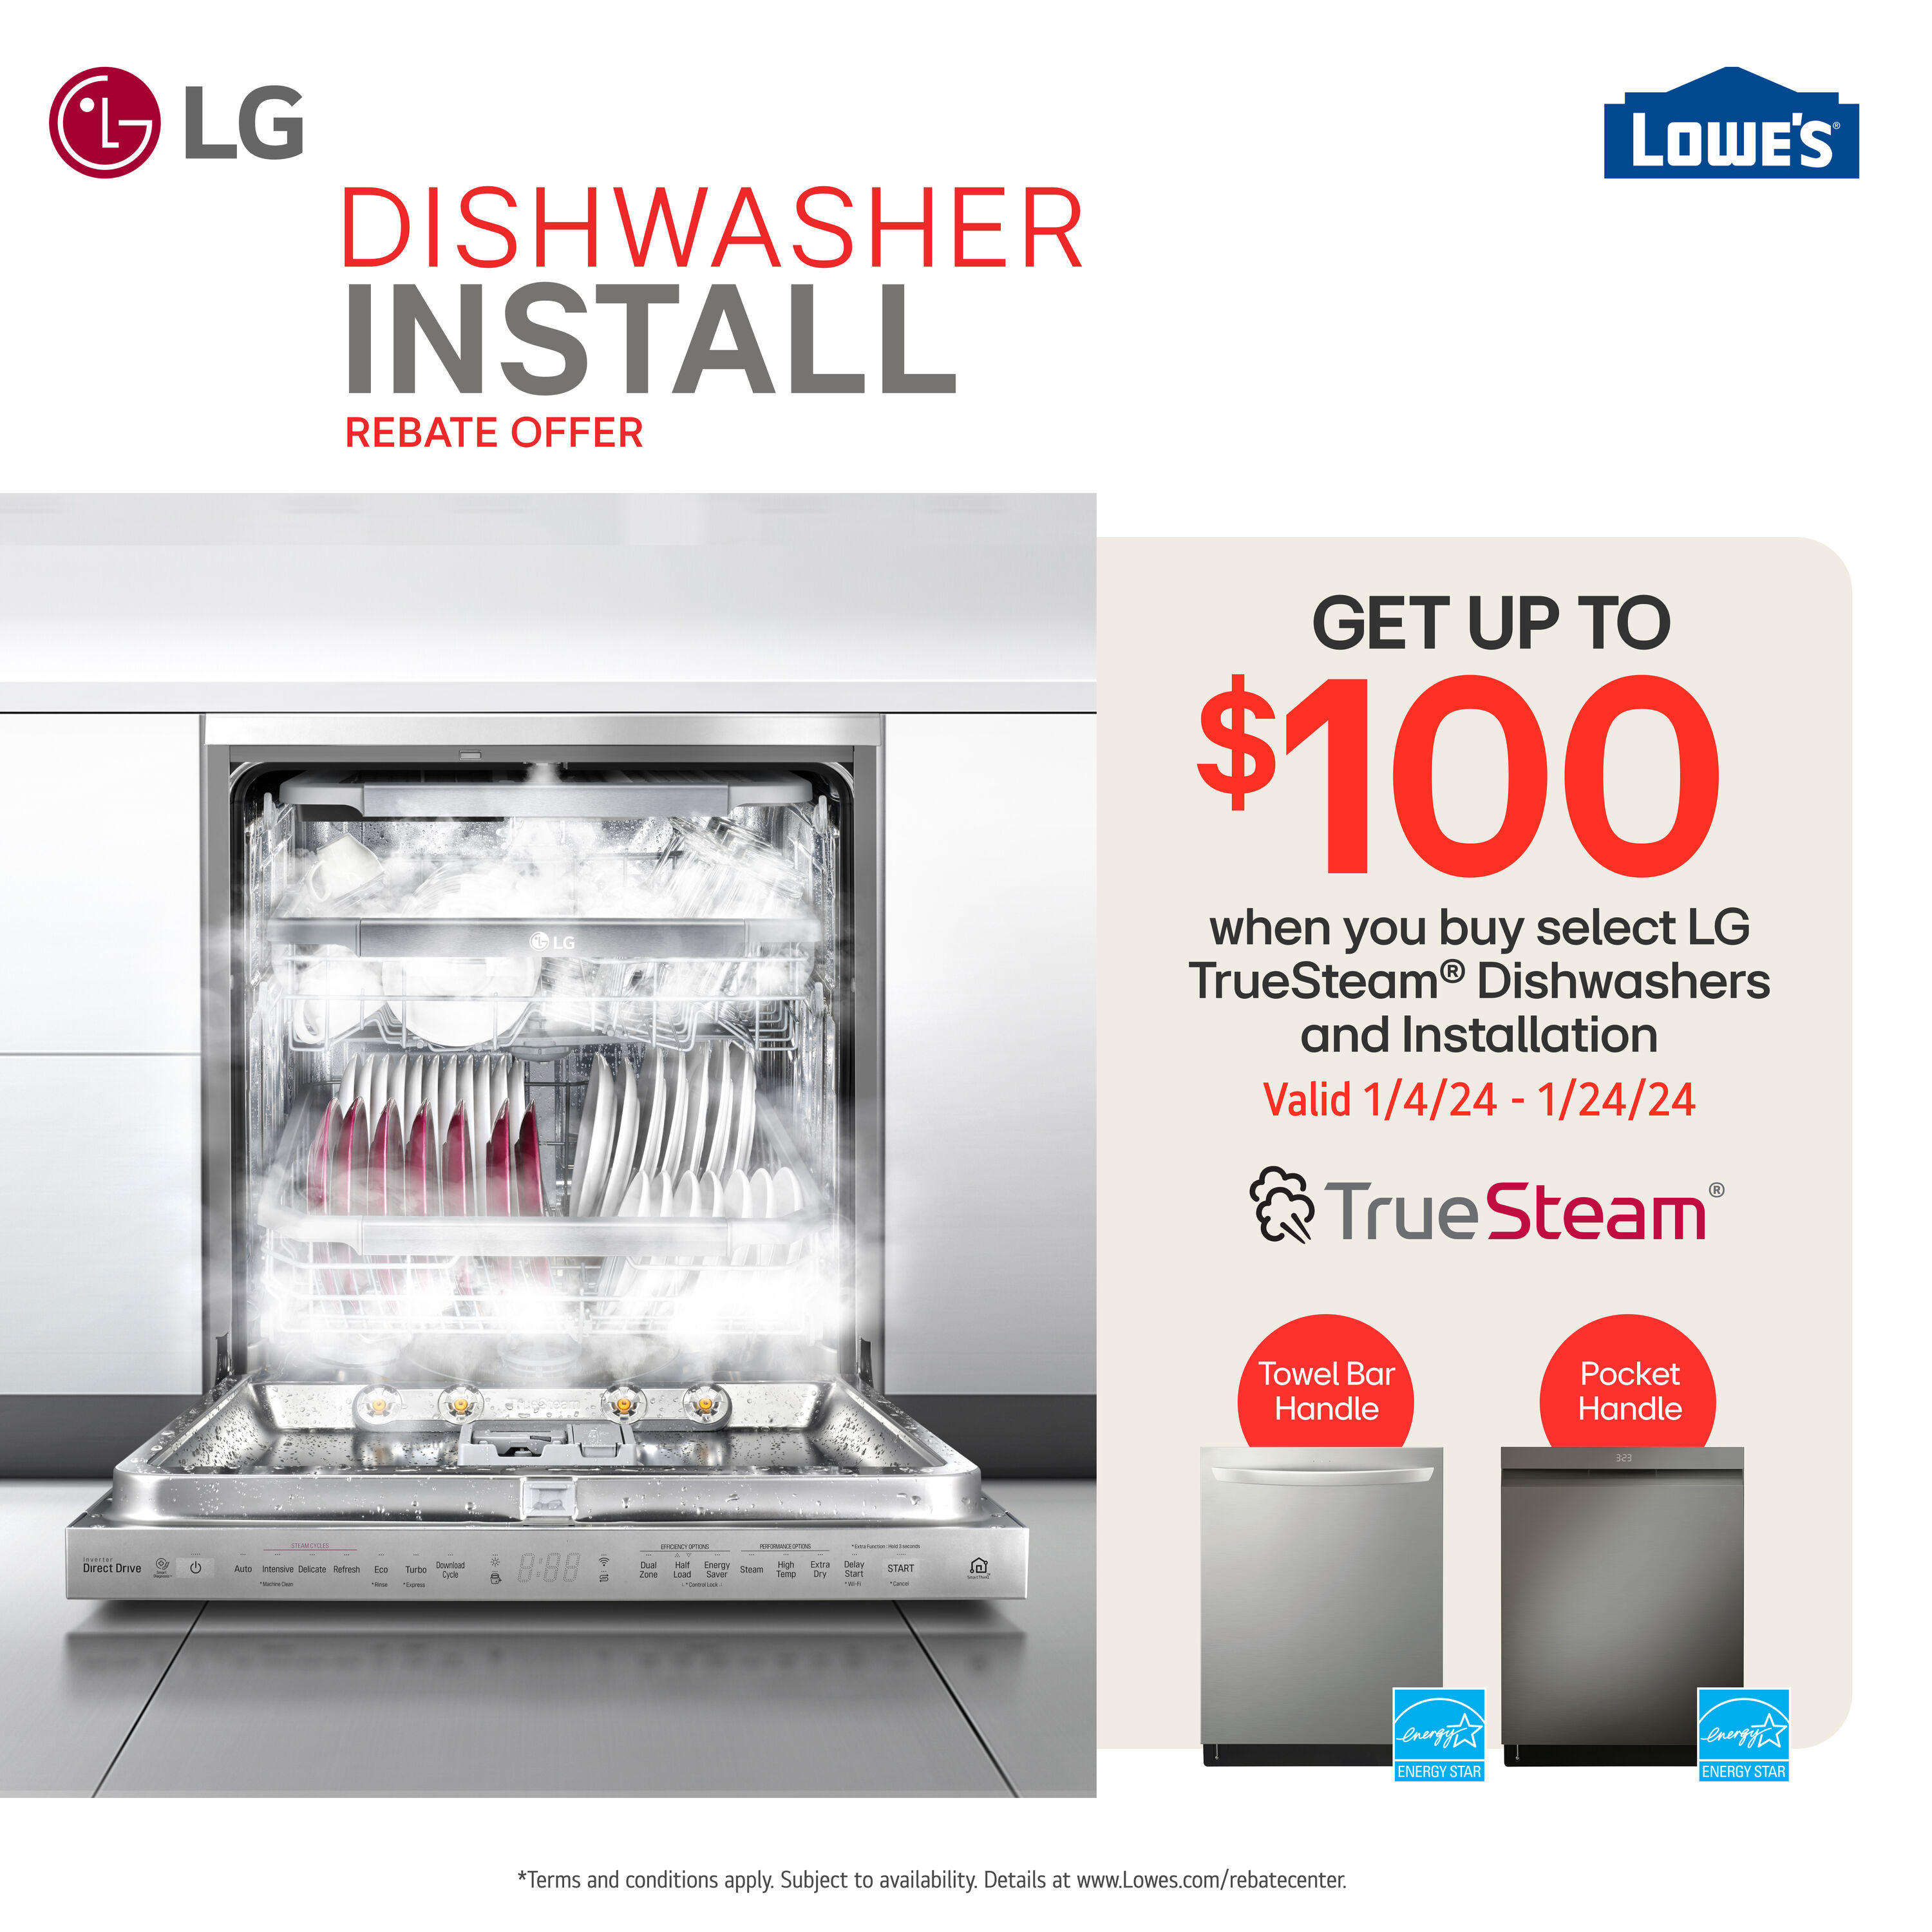 LG LDPS6762S Top Control Wi-Fi Enabled Dishwasher with QuadWash® Pro -  Stainless Steel